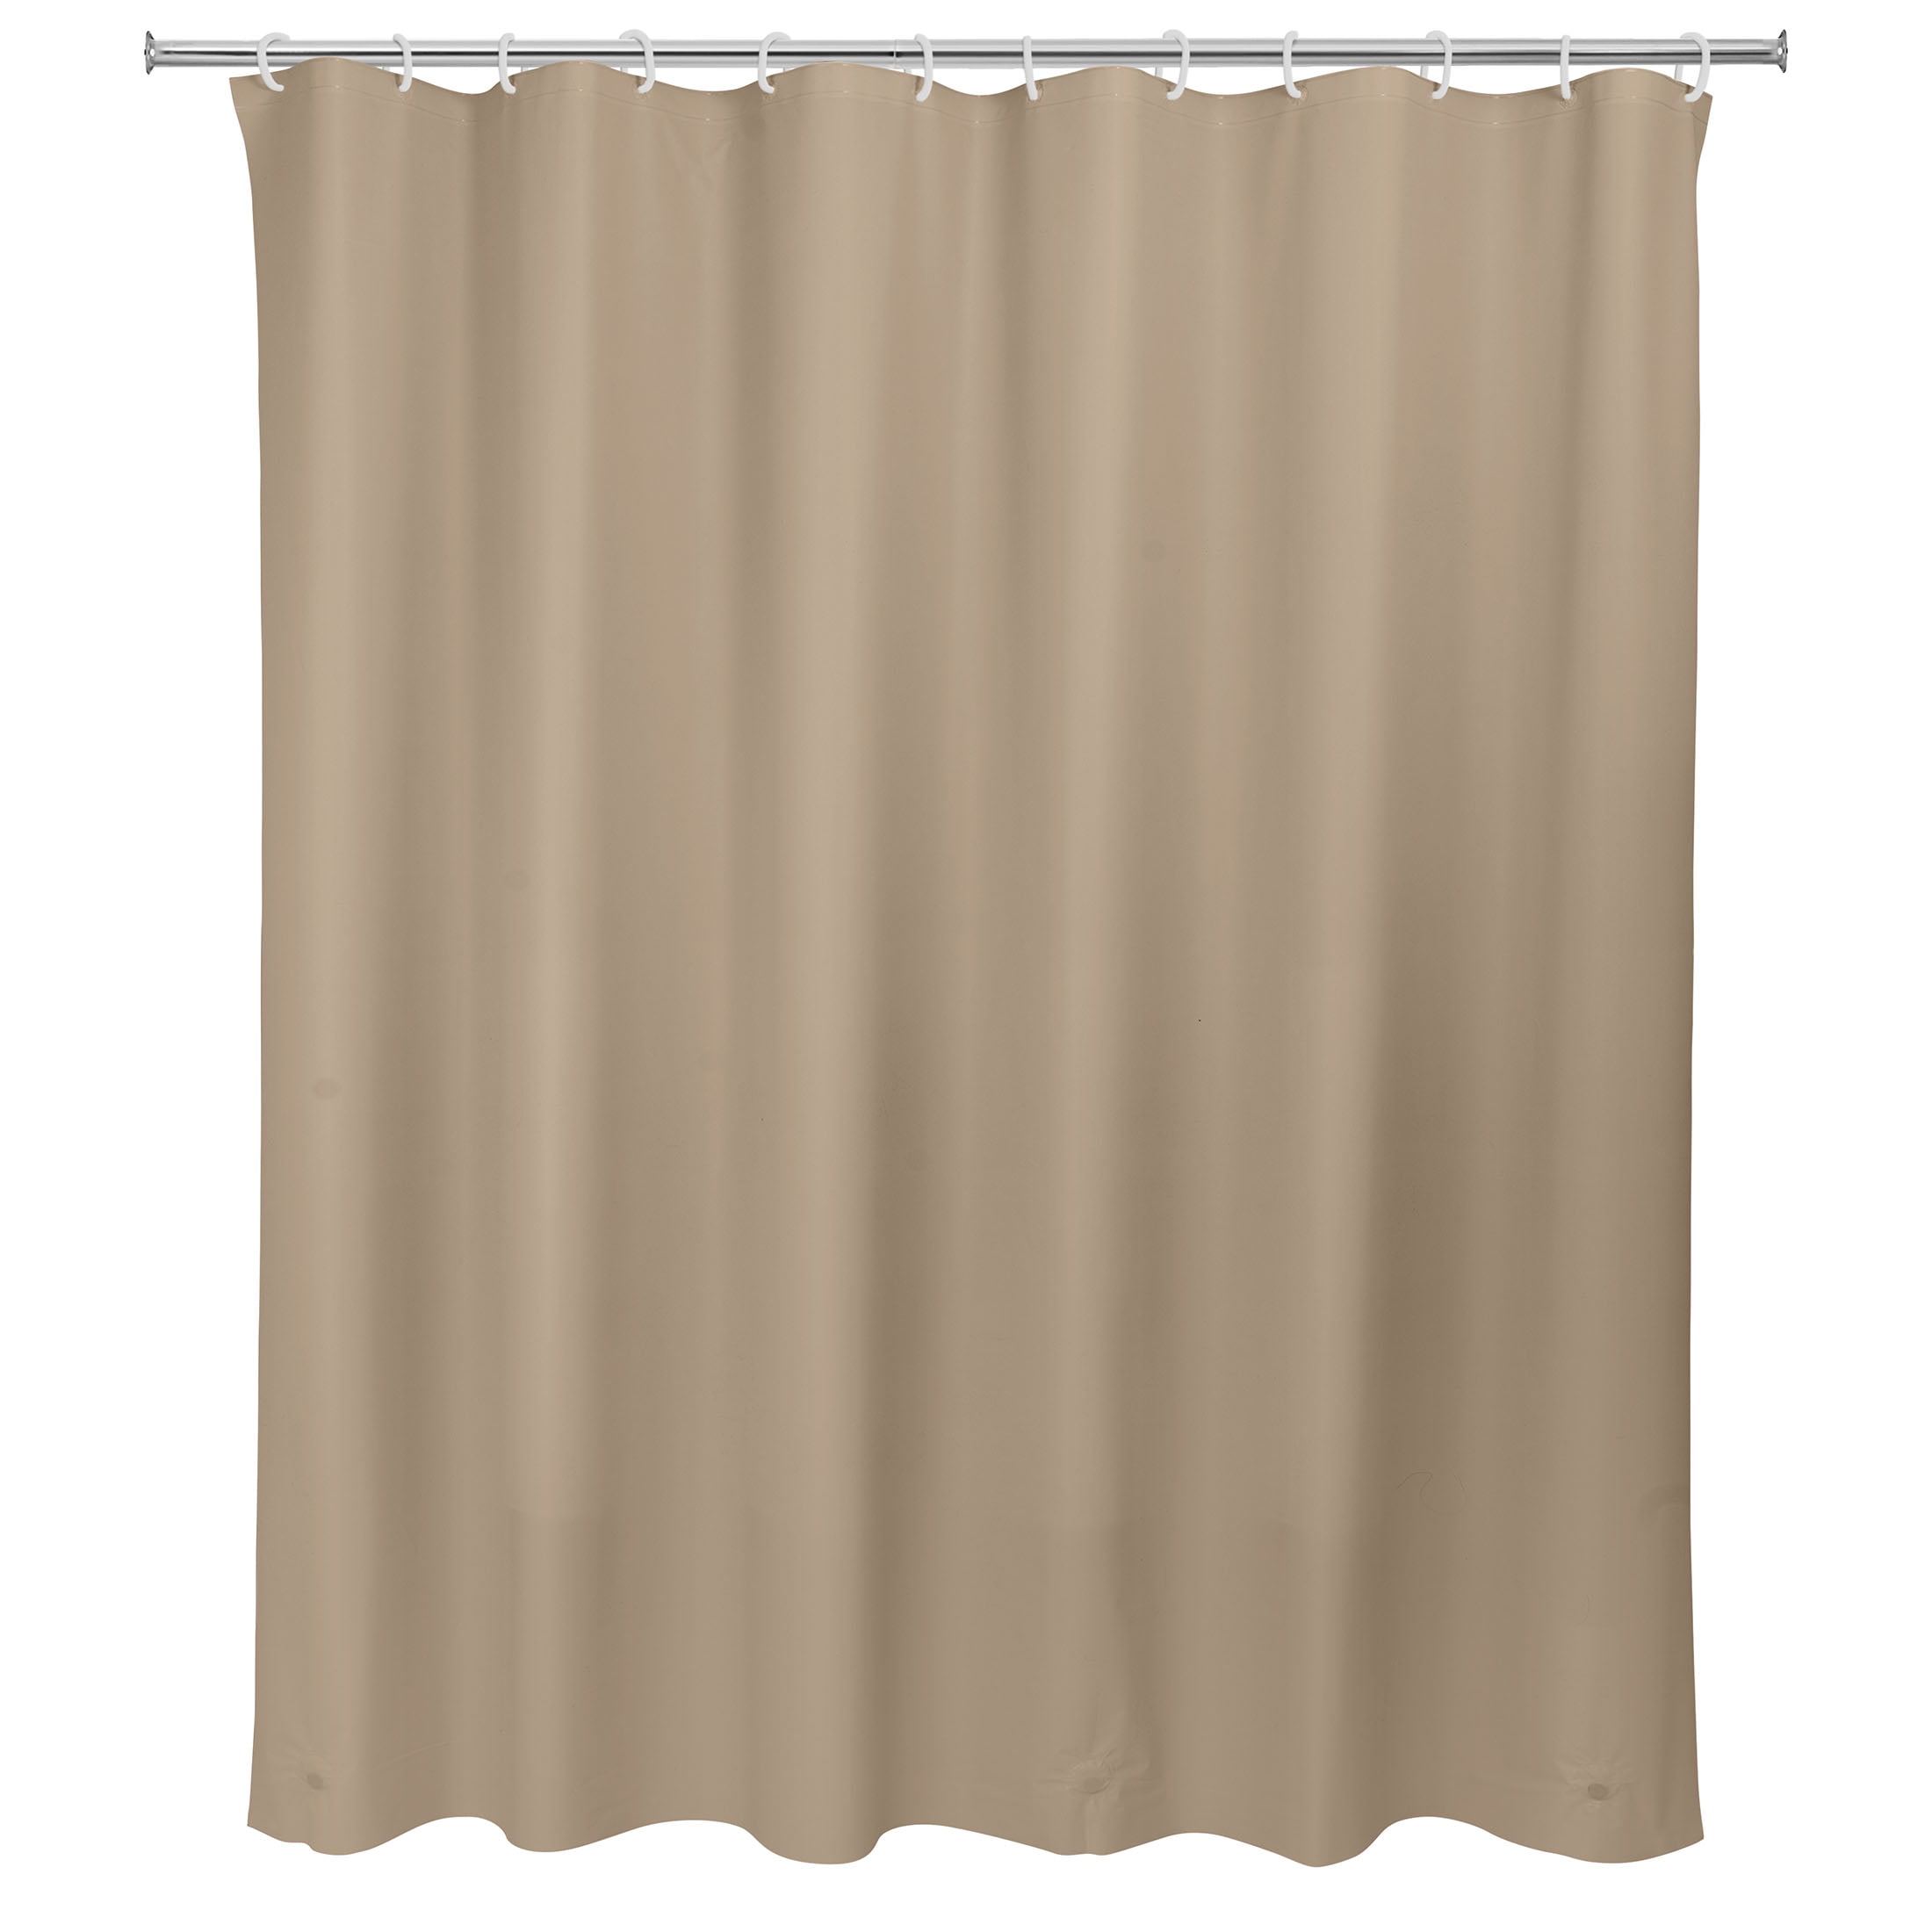 Mainstays Basic Light Weight Thickness, Mainstays Water Repellent 70 X 72 Fabric Shower Curtain Or Liner